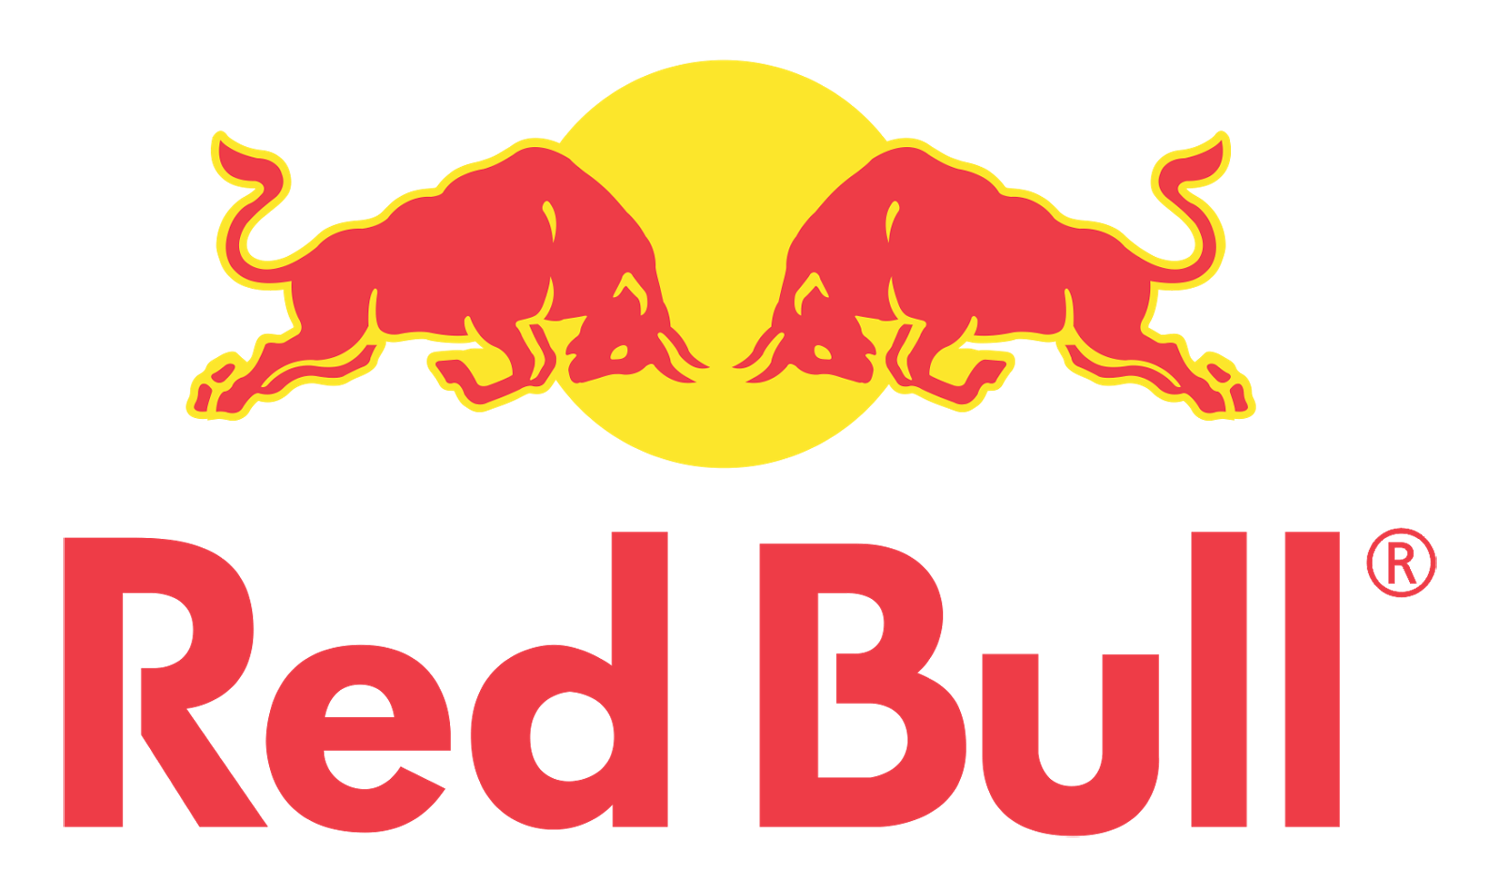 Red Bull Logo - Red Bull Logo, Red Bull Symbol, Meaning, History and Evolution